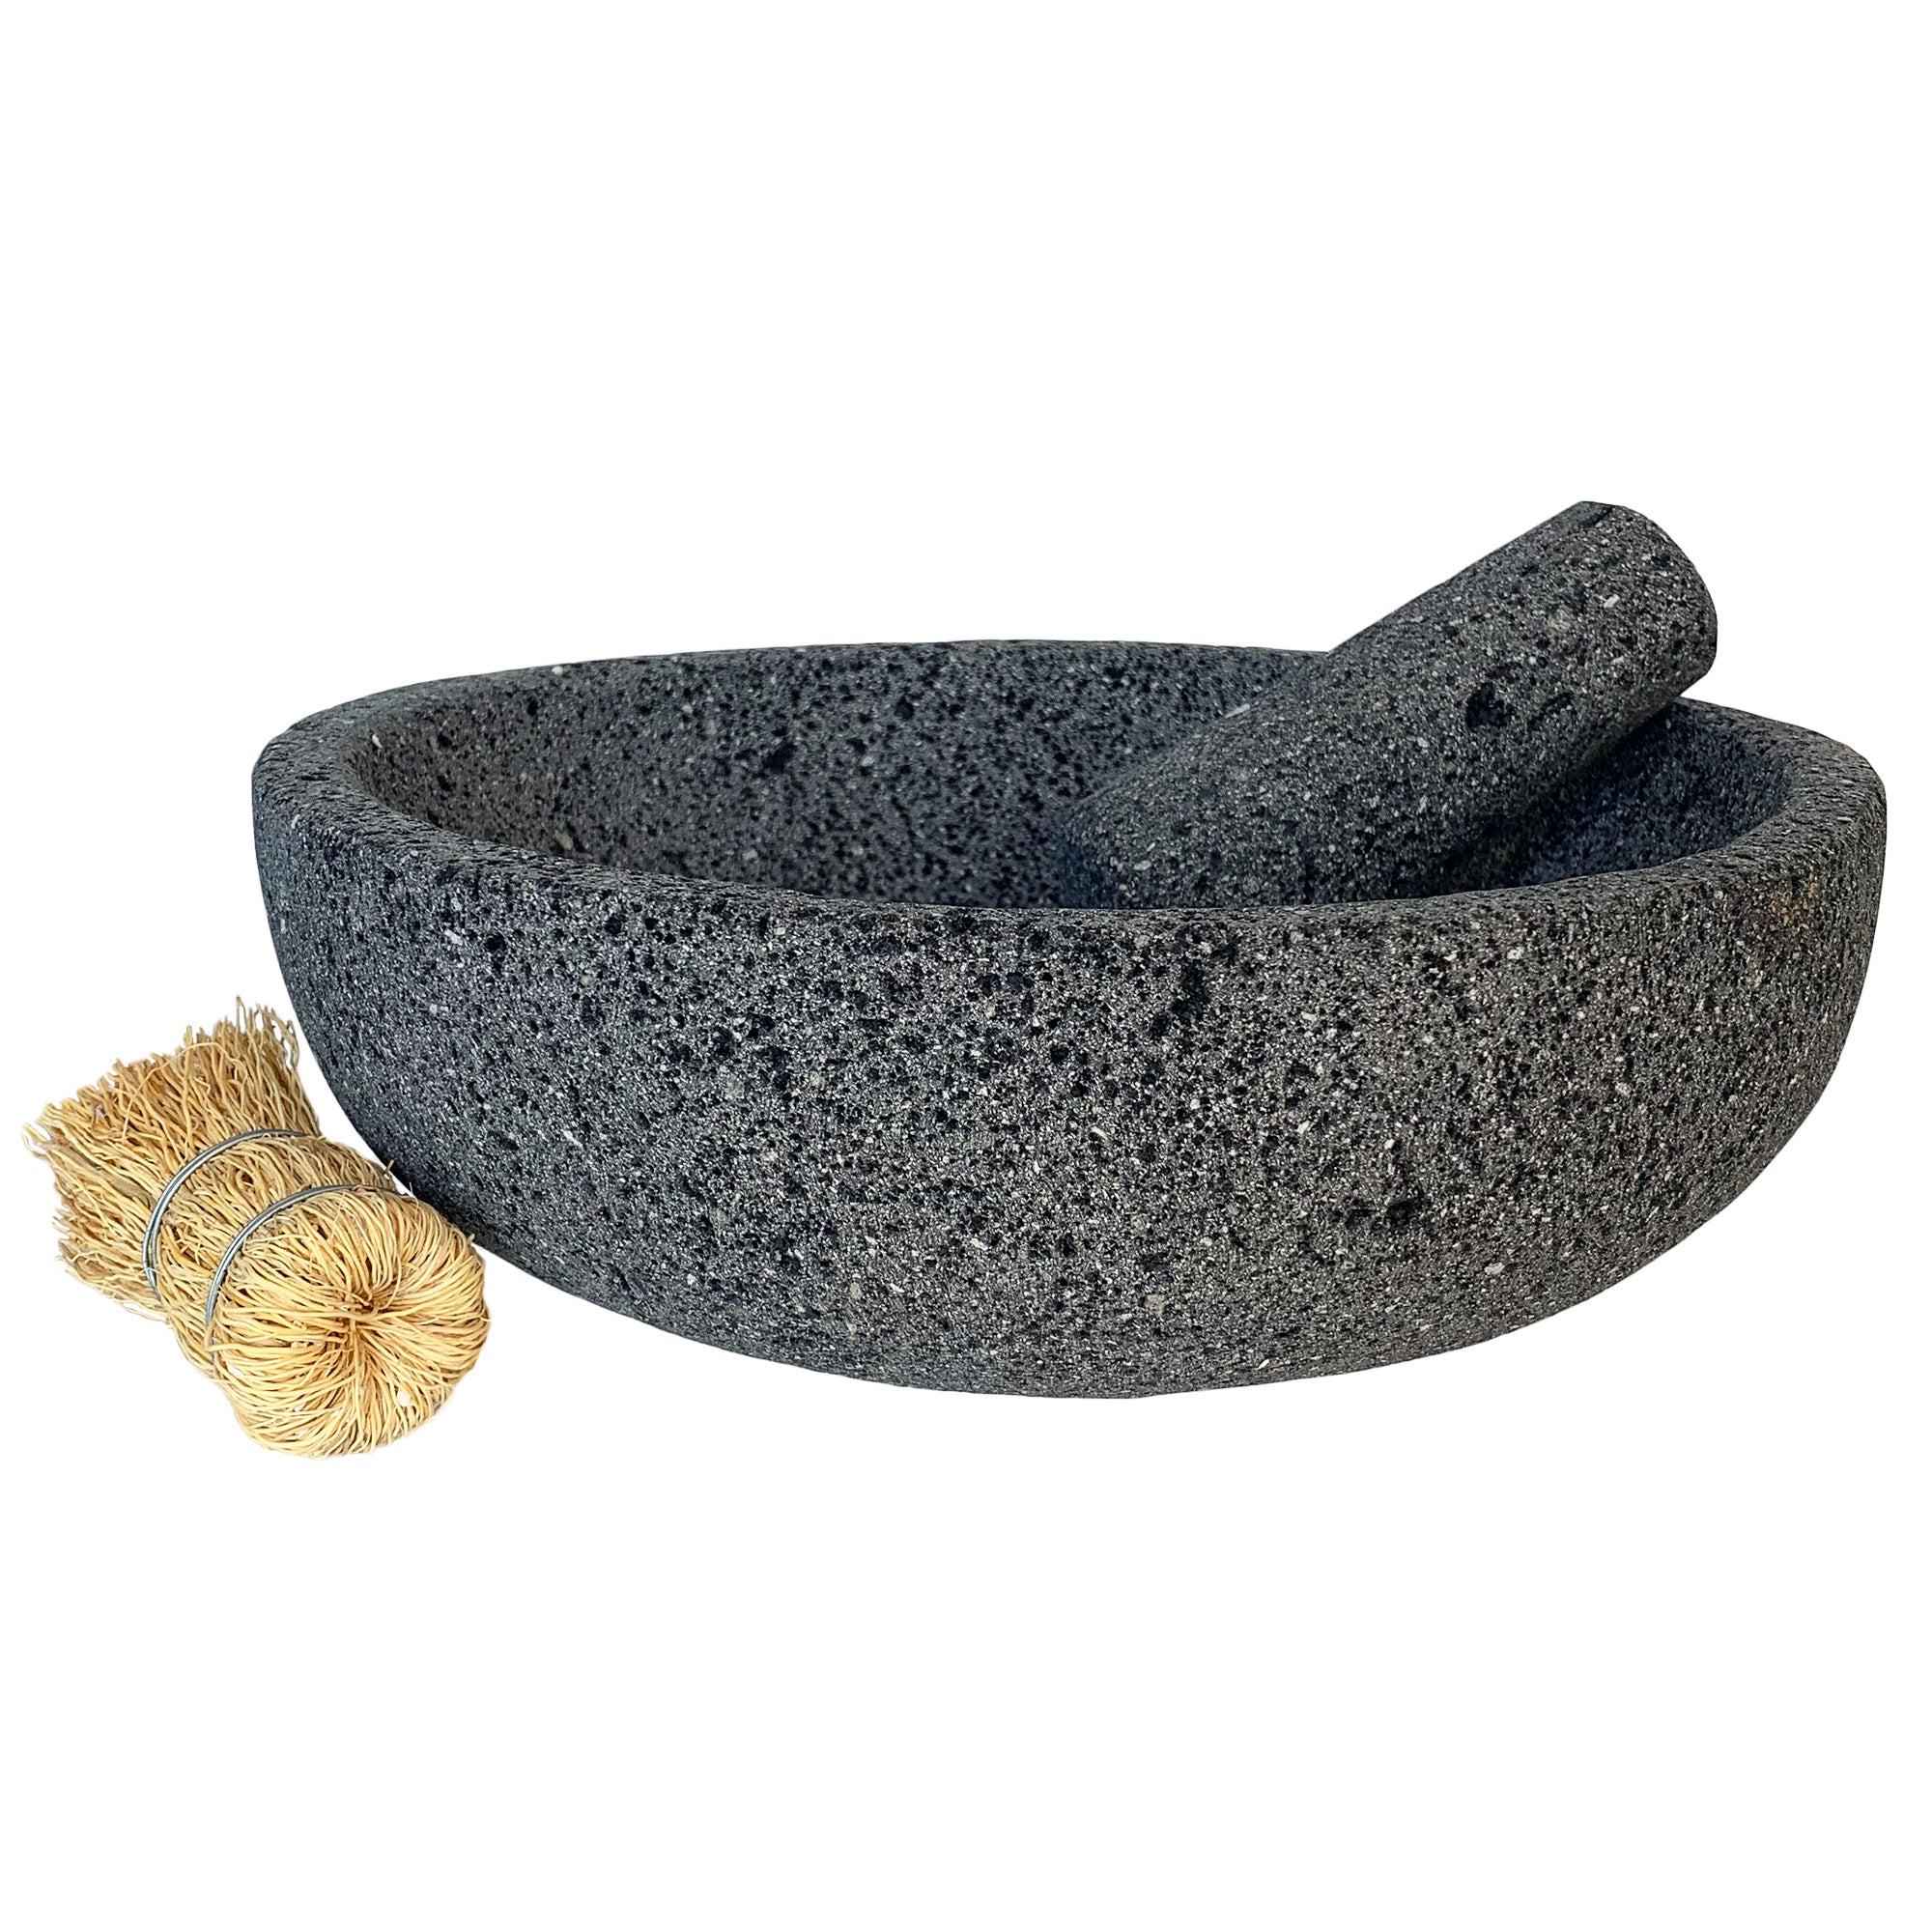 Small (8 inch) Mexican Molcajete Bowl  Hand-carved 100% Volcanic Ston –  The Curated Pantry